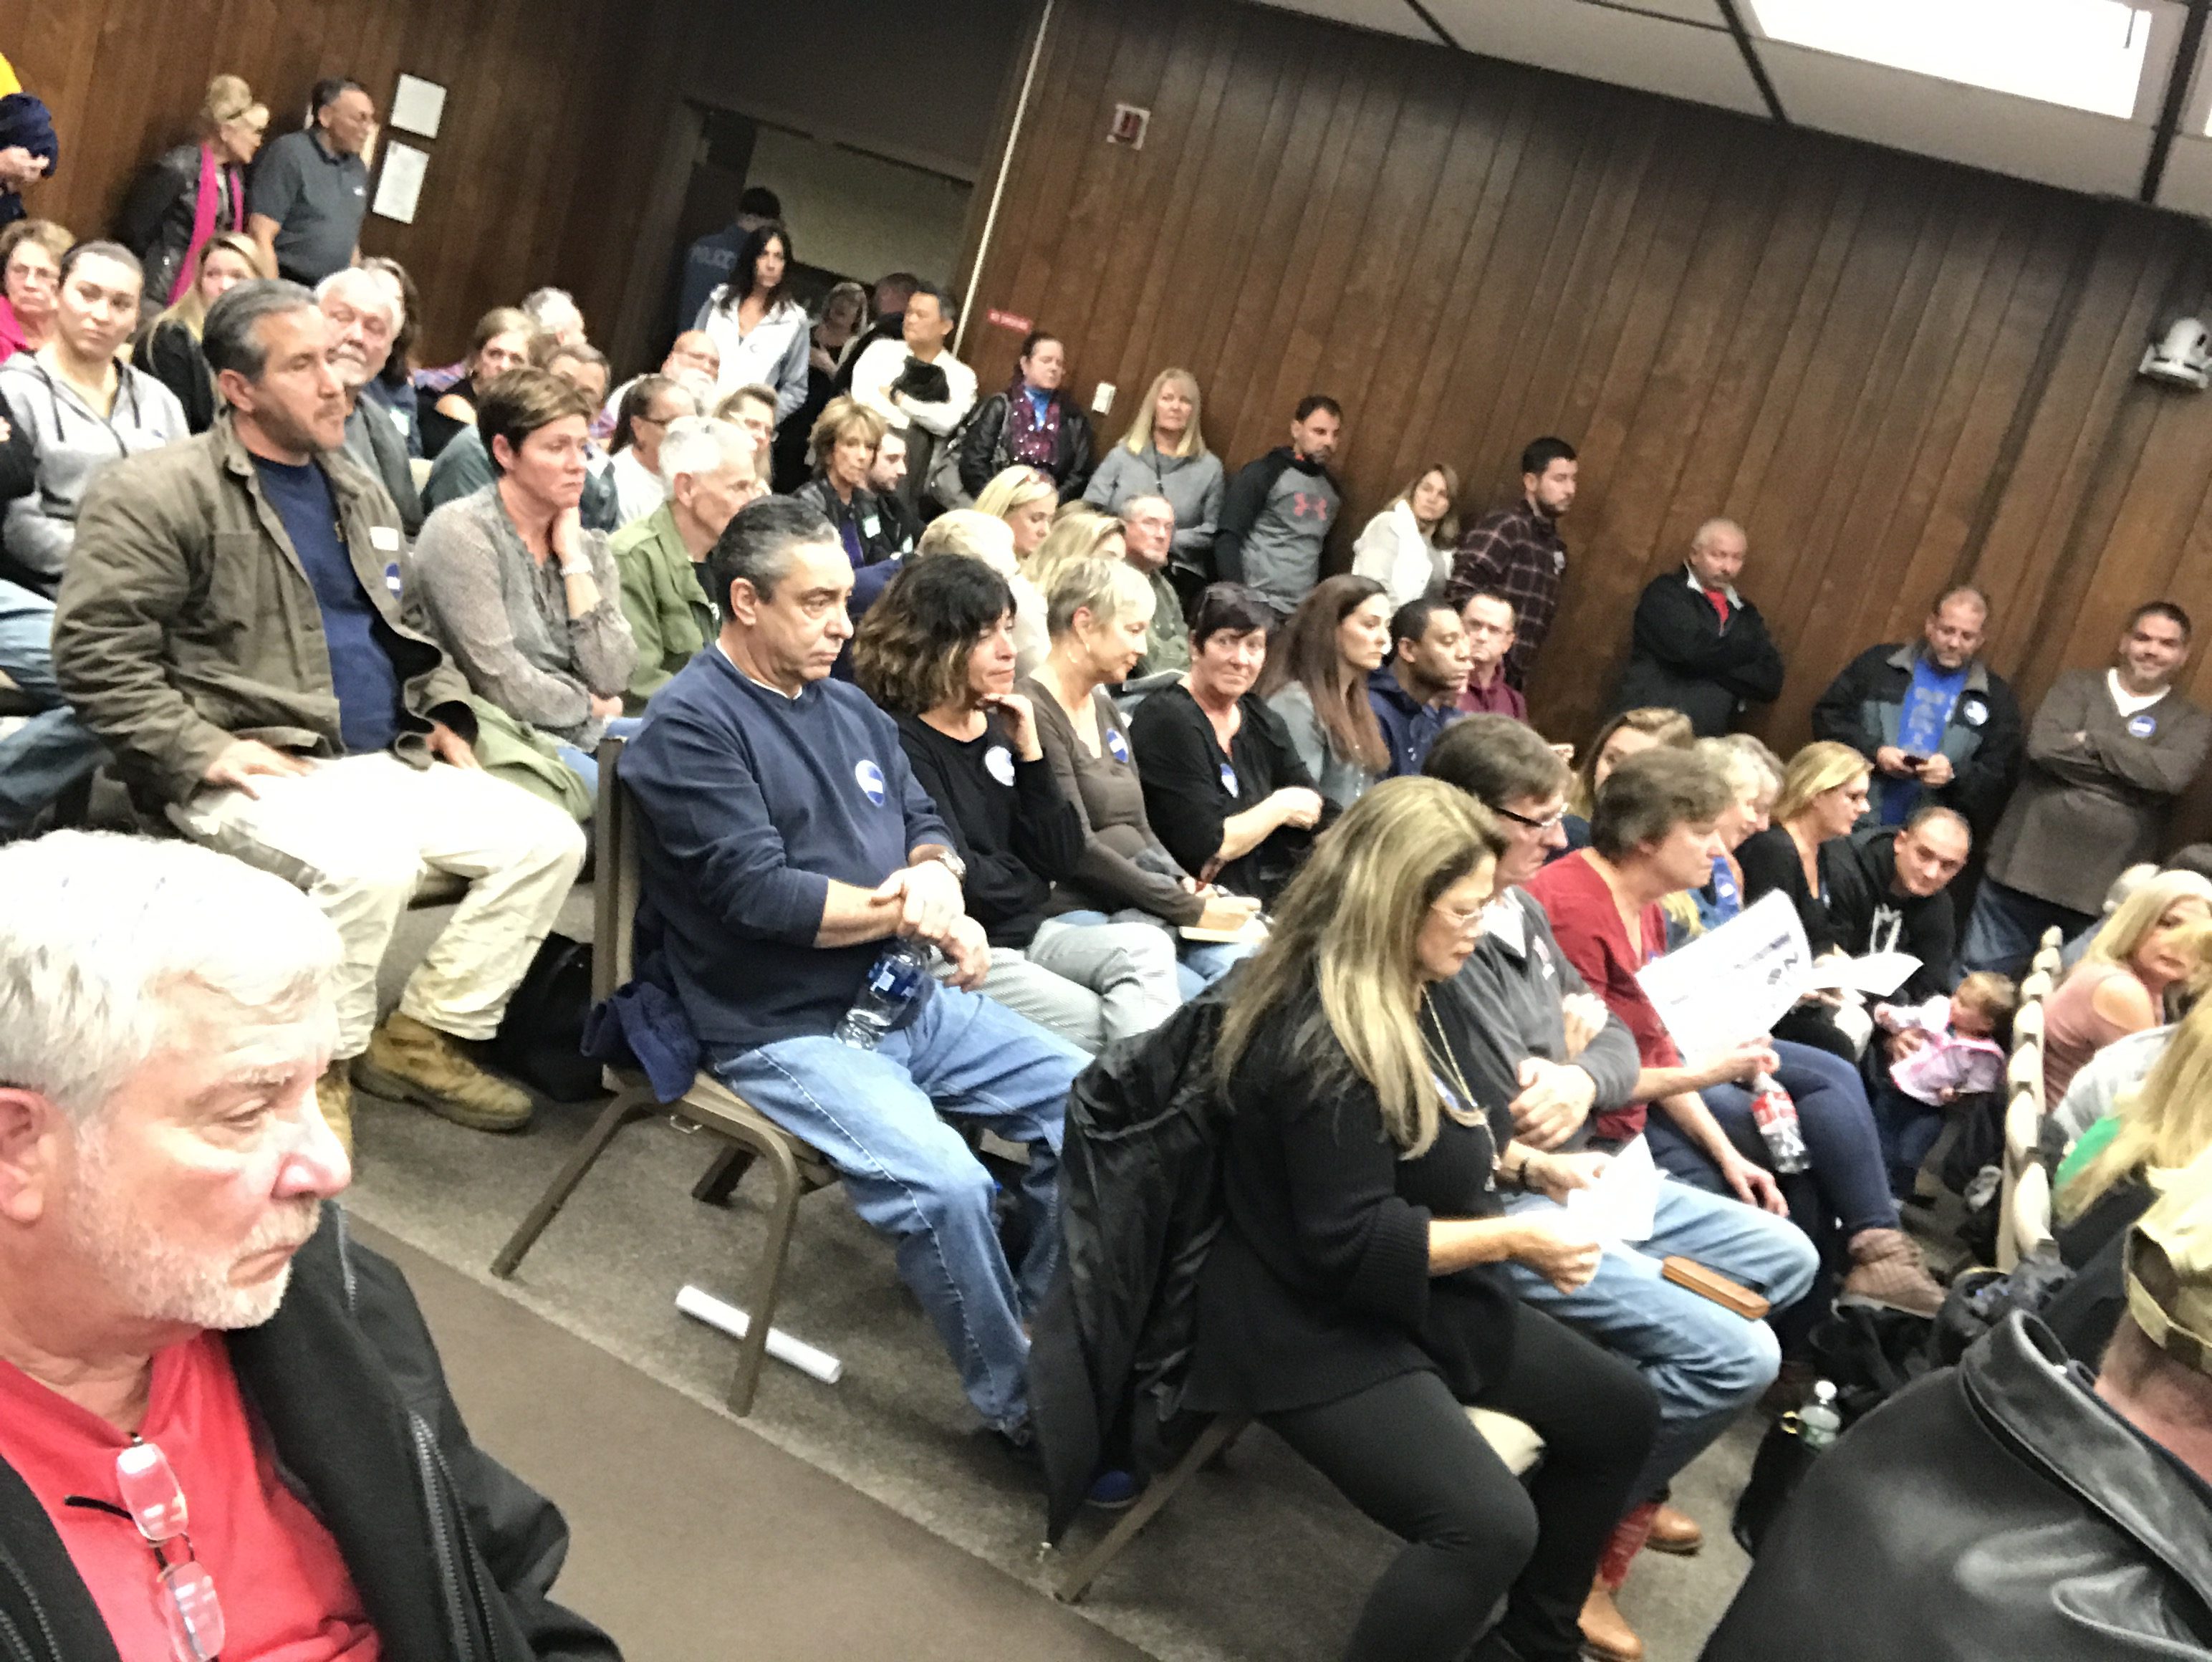 A crowd packed inside the Brick Township municipal complex for a Nov. 19, 2018 hearing on a medical marijuana dispensary. (Photo: Daniel Nee)